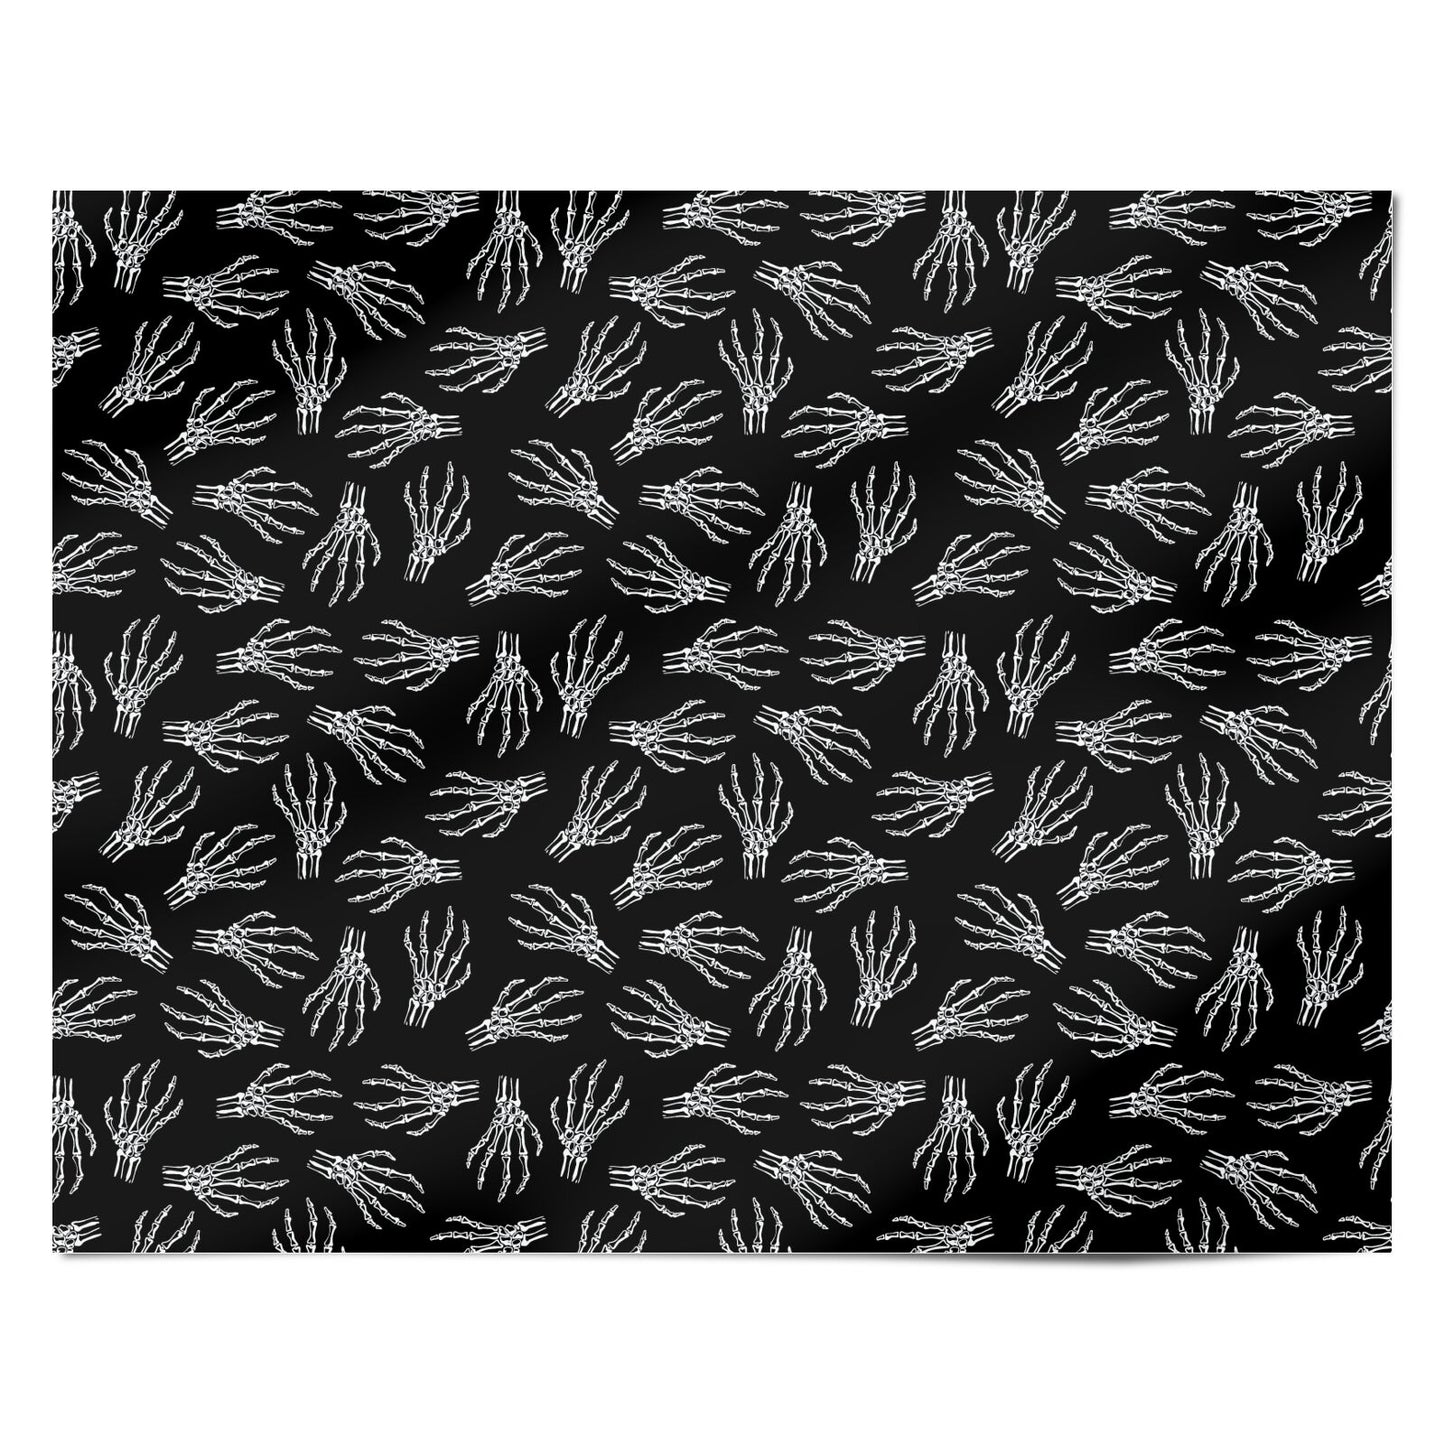 Skeleton Hands Personalised Wrapping Paper Alternative